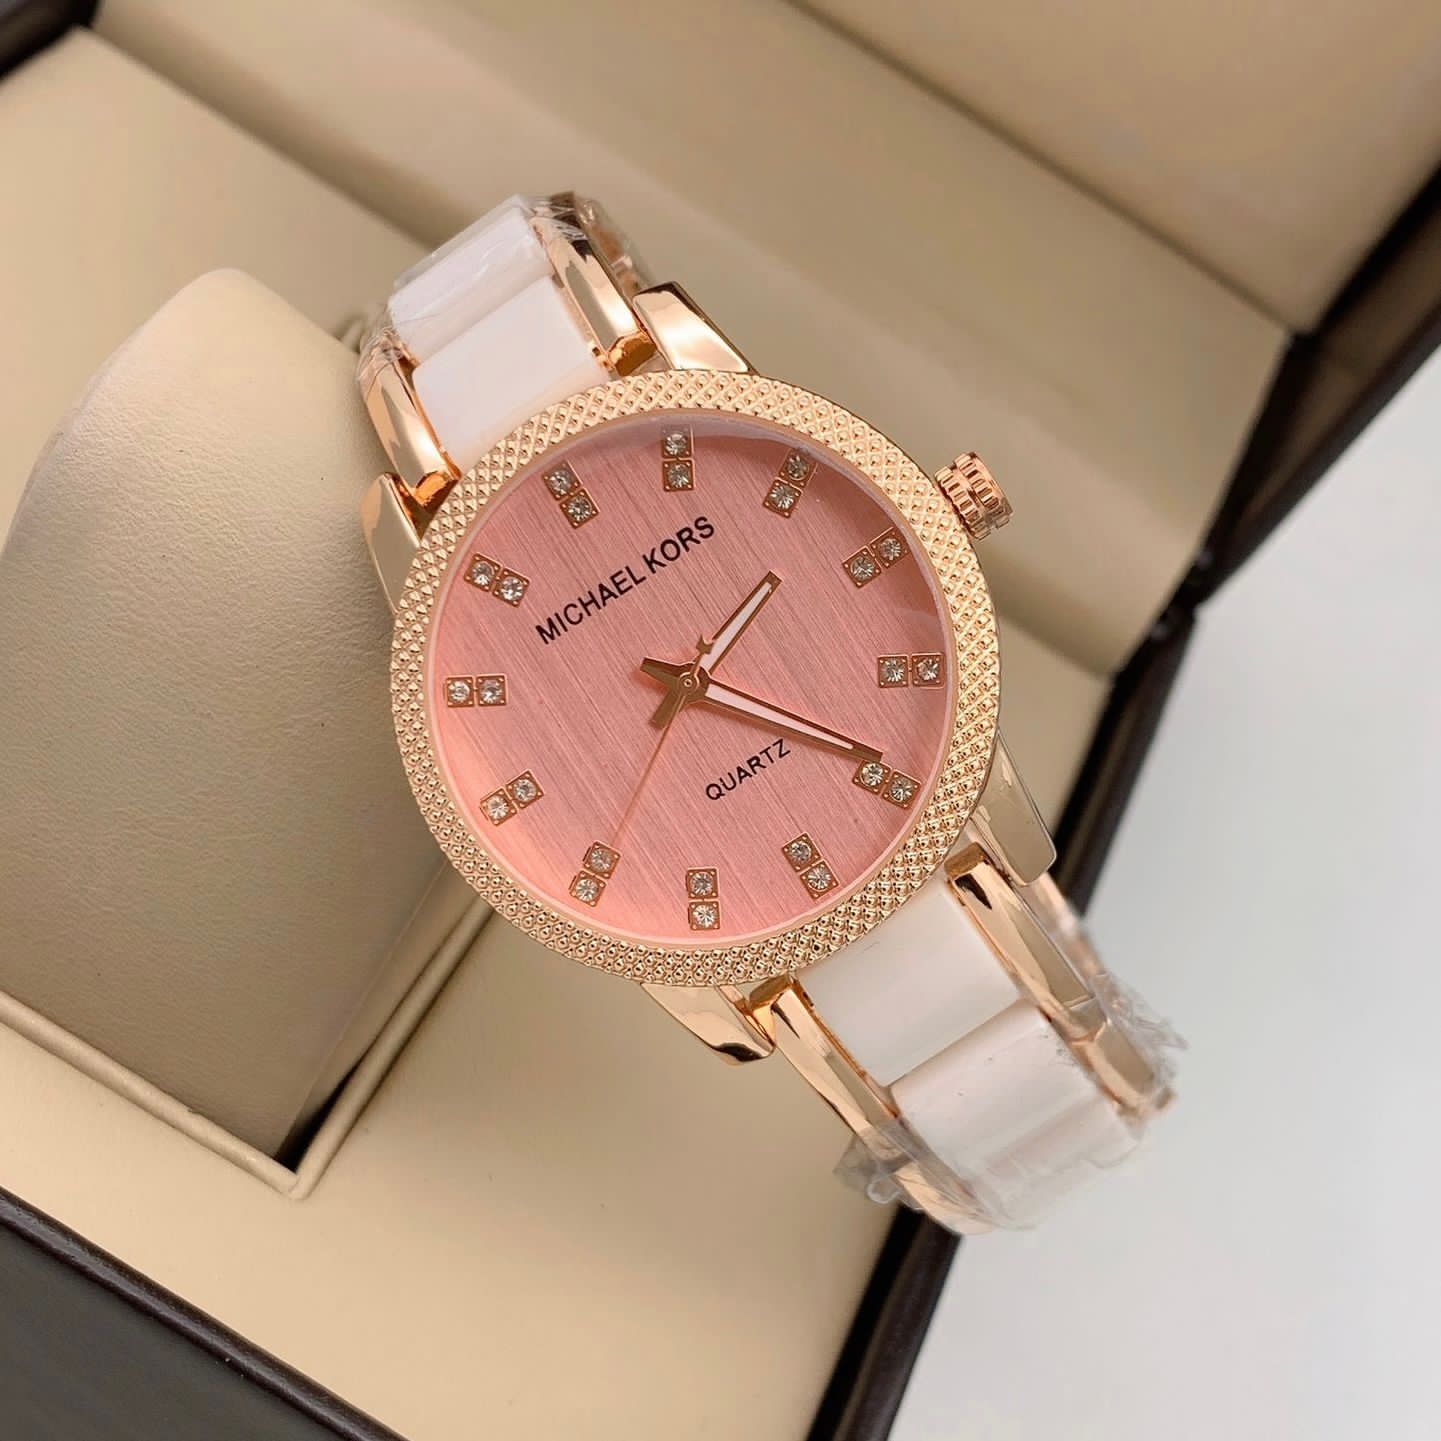 Michael Kors White Gold Strap Gold Tone Case Stainless Steel Analog Pink Dial Watch Women's Watch For Girl Or Woman Best Gift Watch-MK-8017